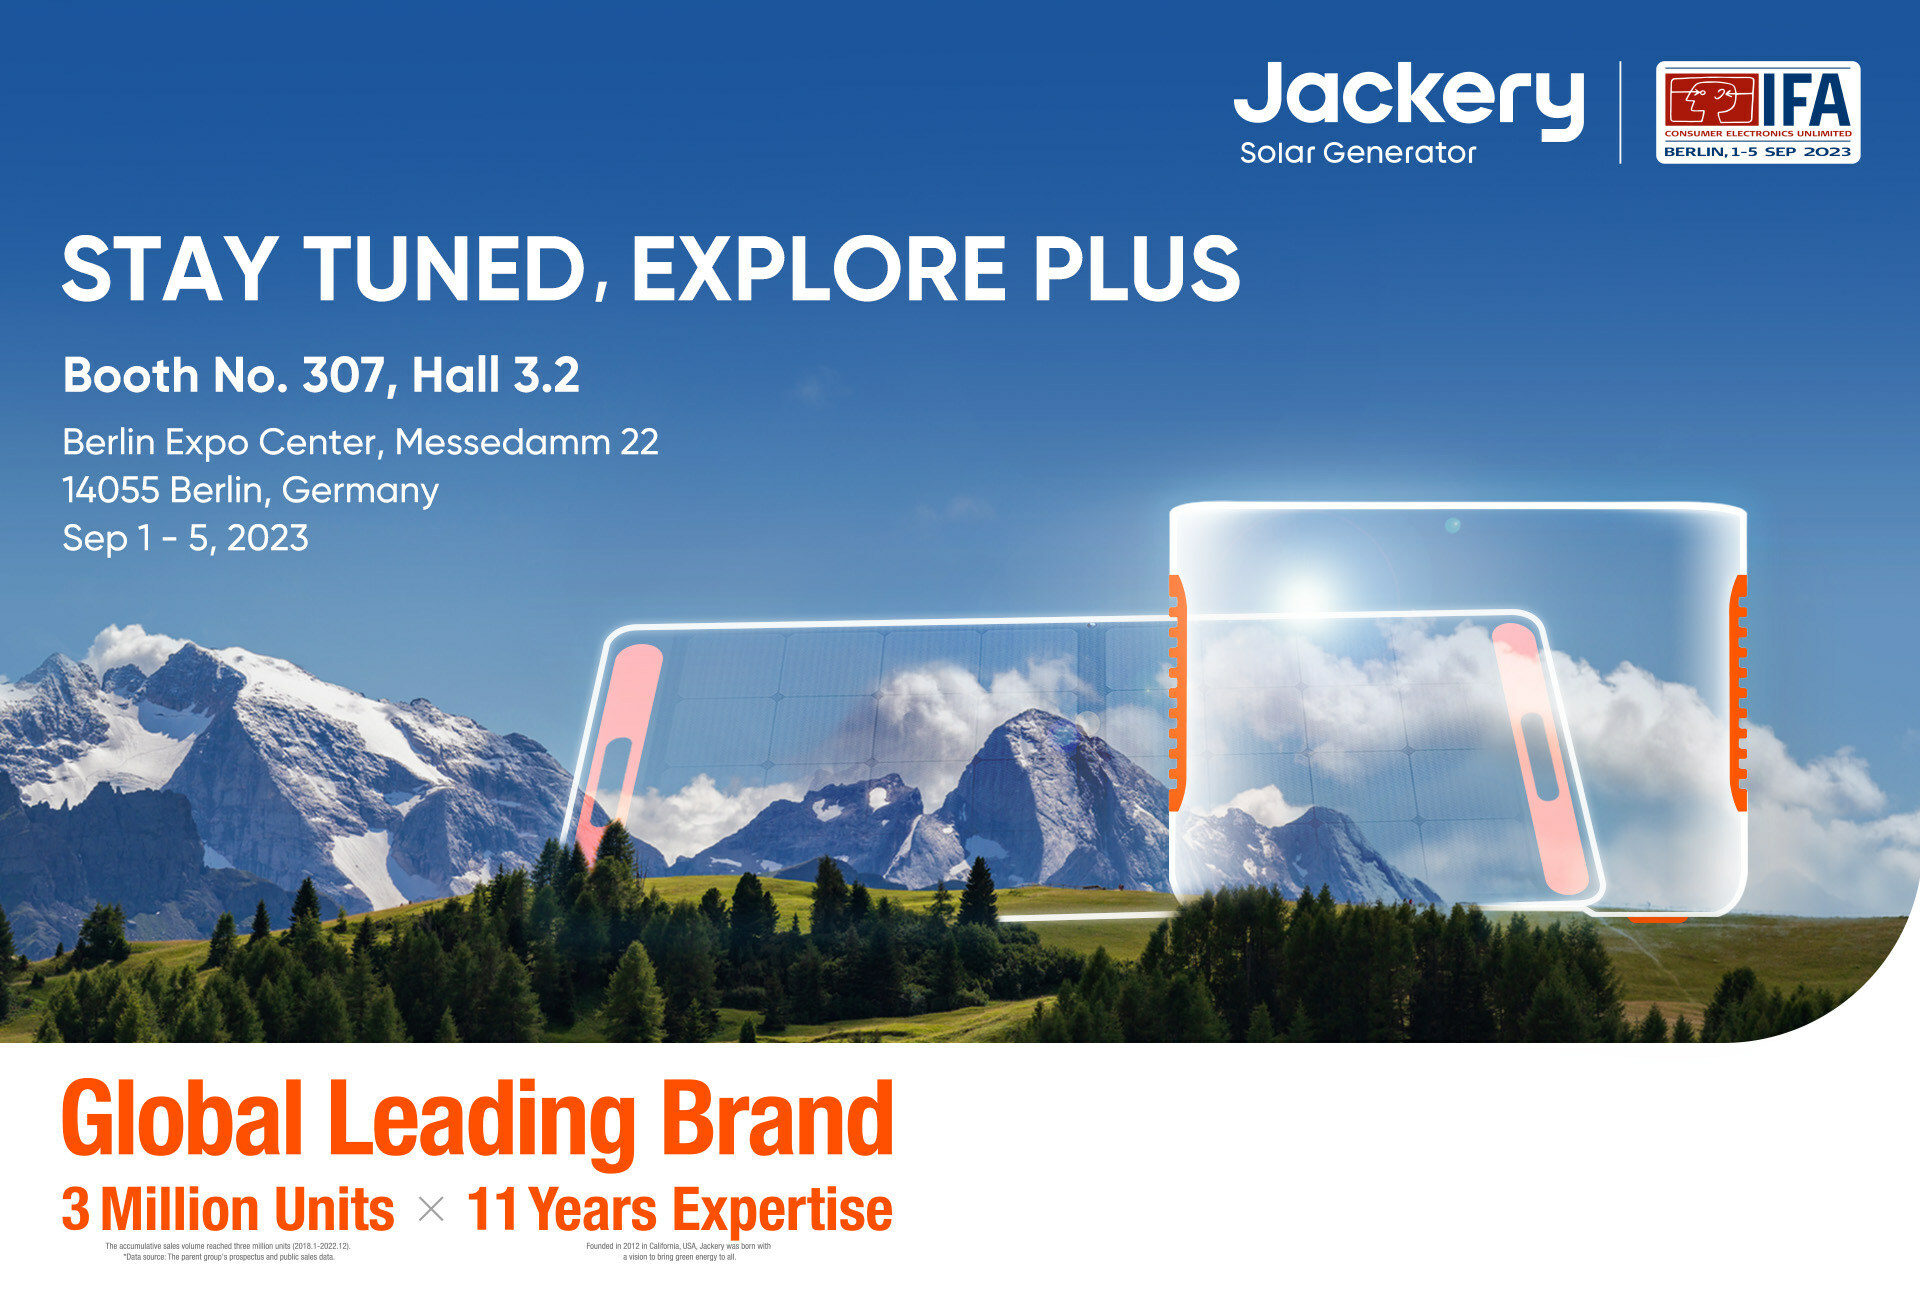 Jackery to Unveil Latest Flagship Product at IFA Berlin 2023, Embracing More Freedom and Energy Independence